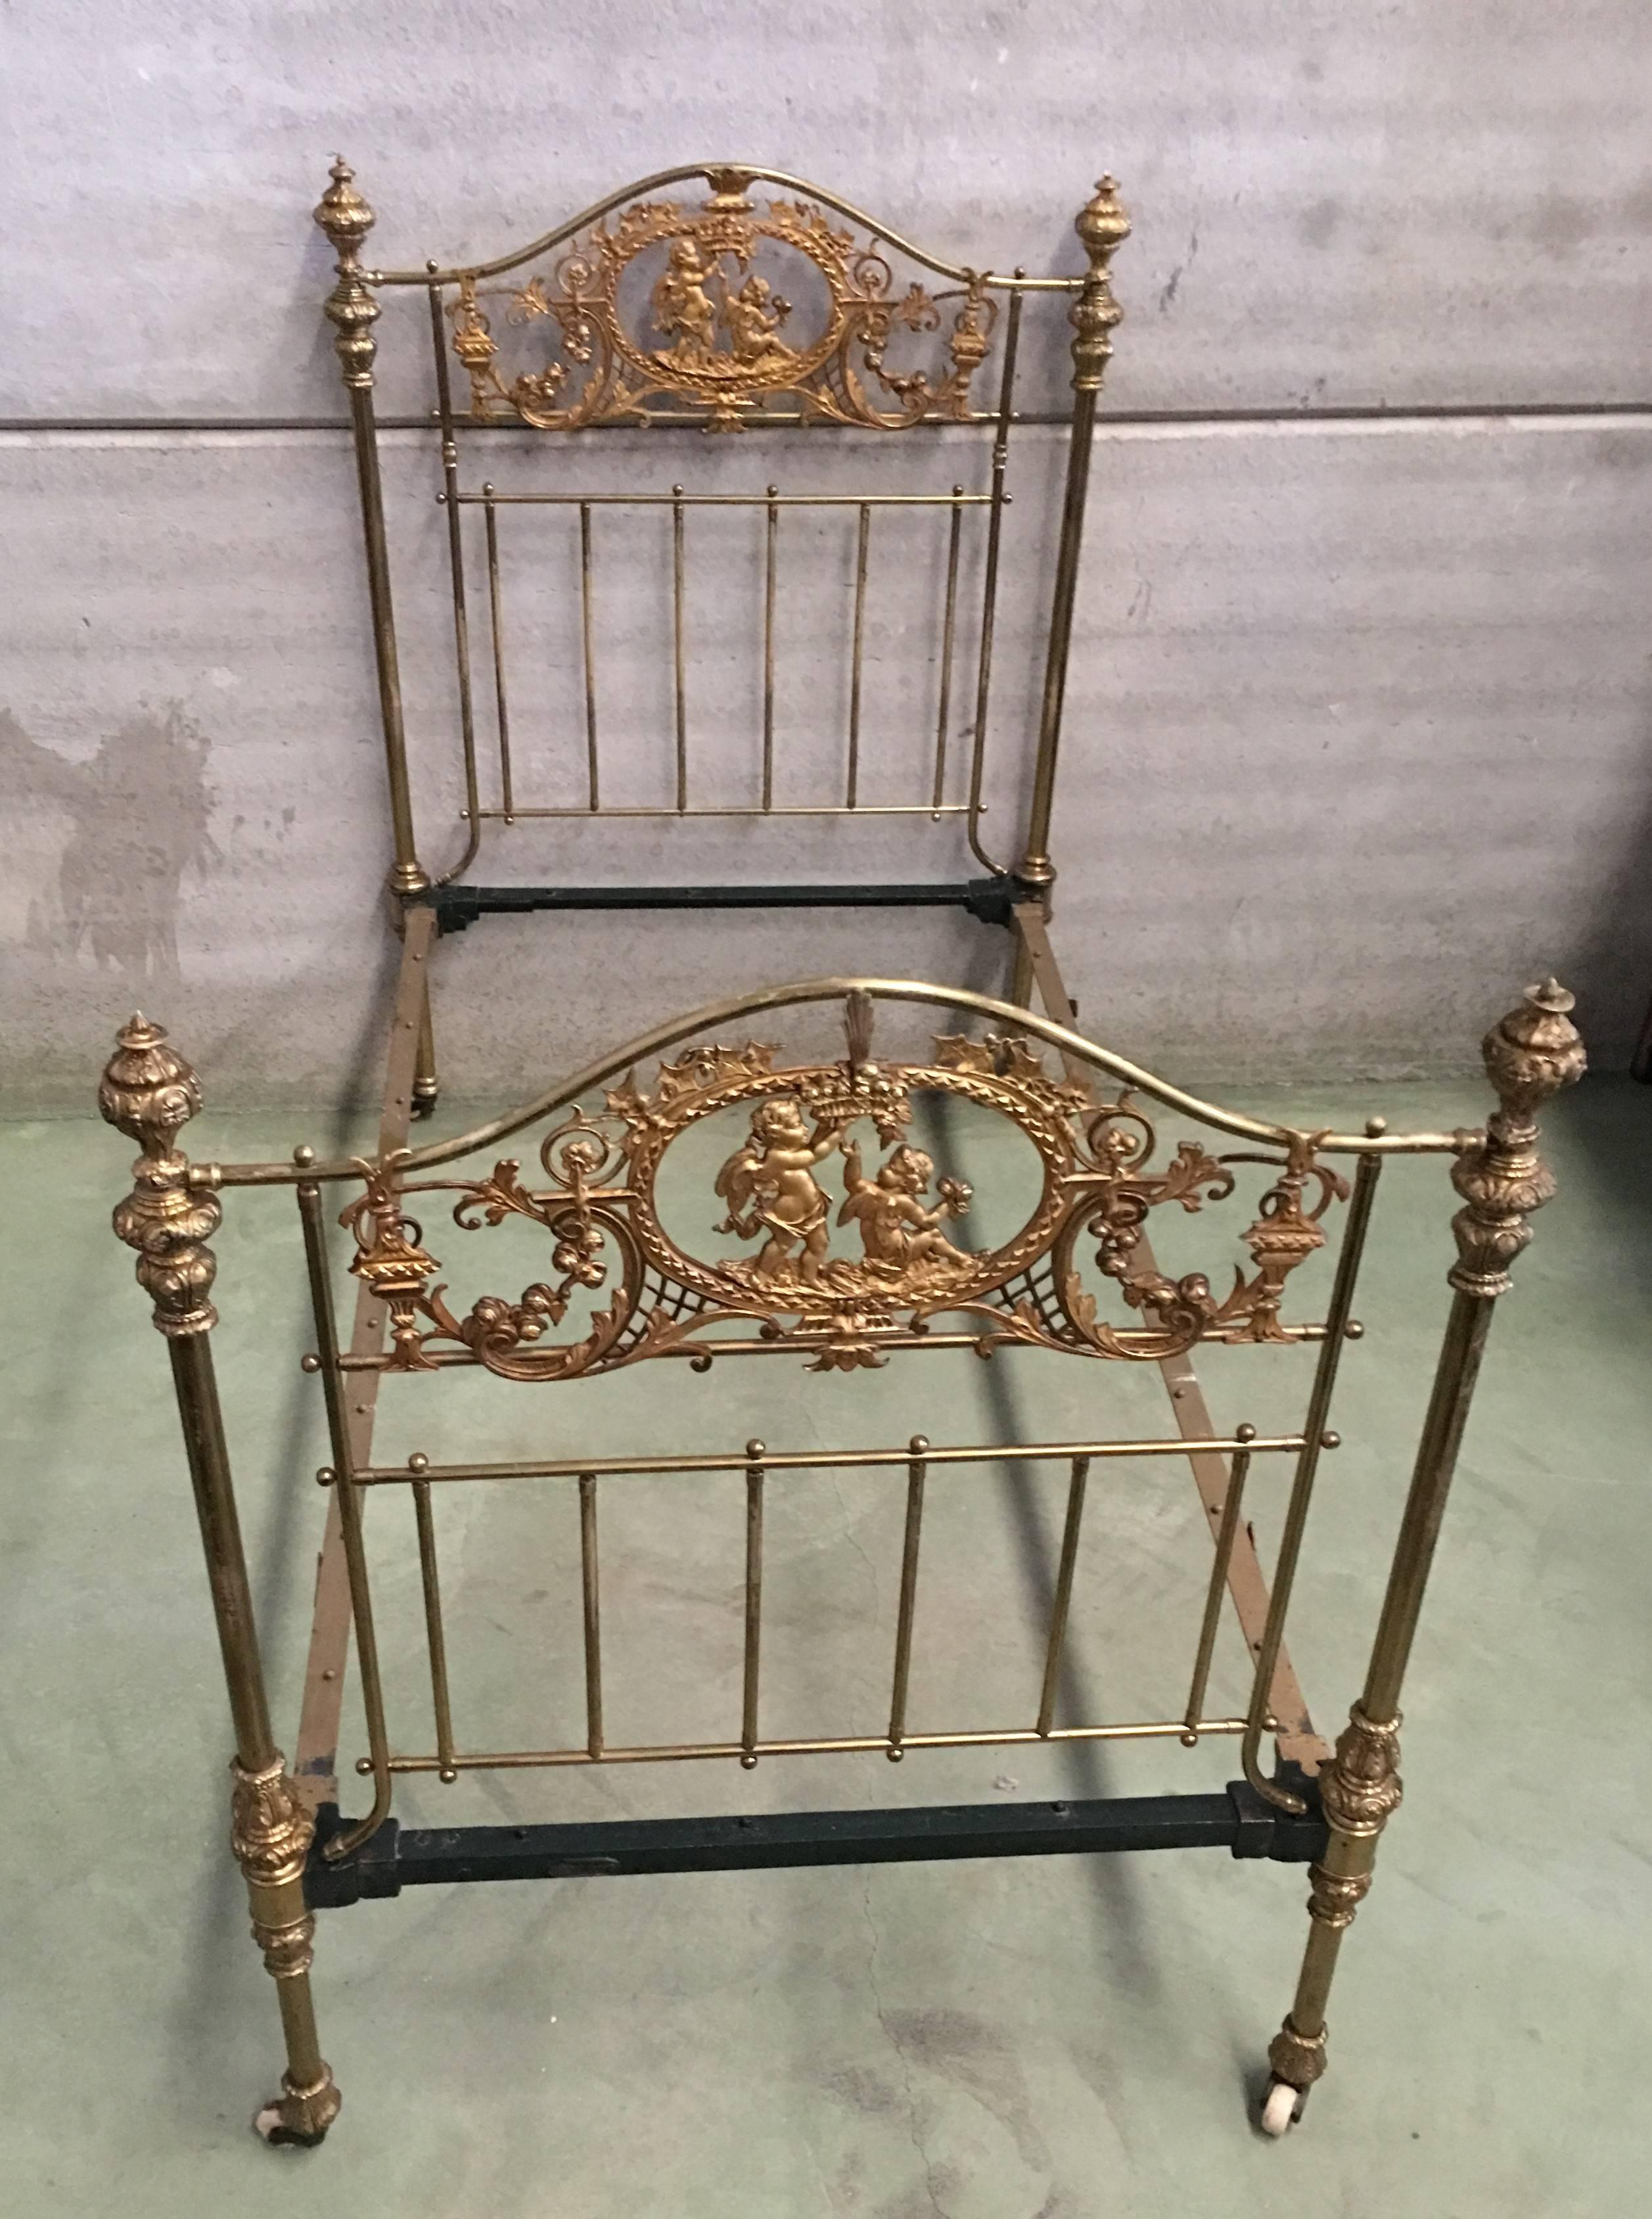 Baroque Revival English Bronze and Brass Twin Extra Large Bed with Cherubs, Headboard, Signed